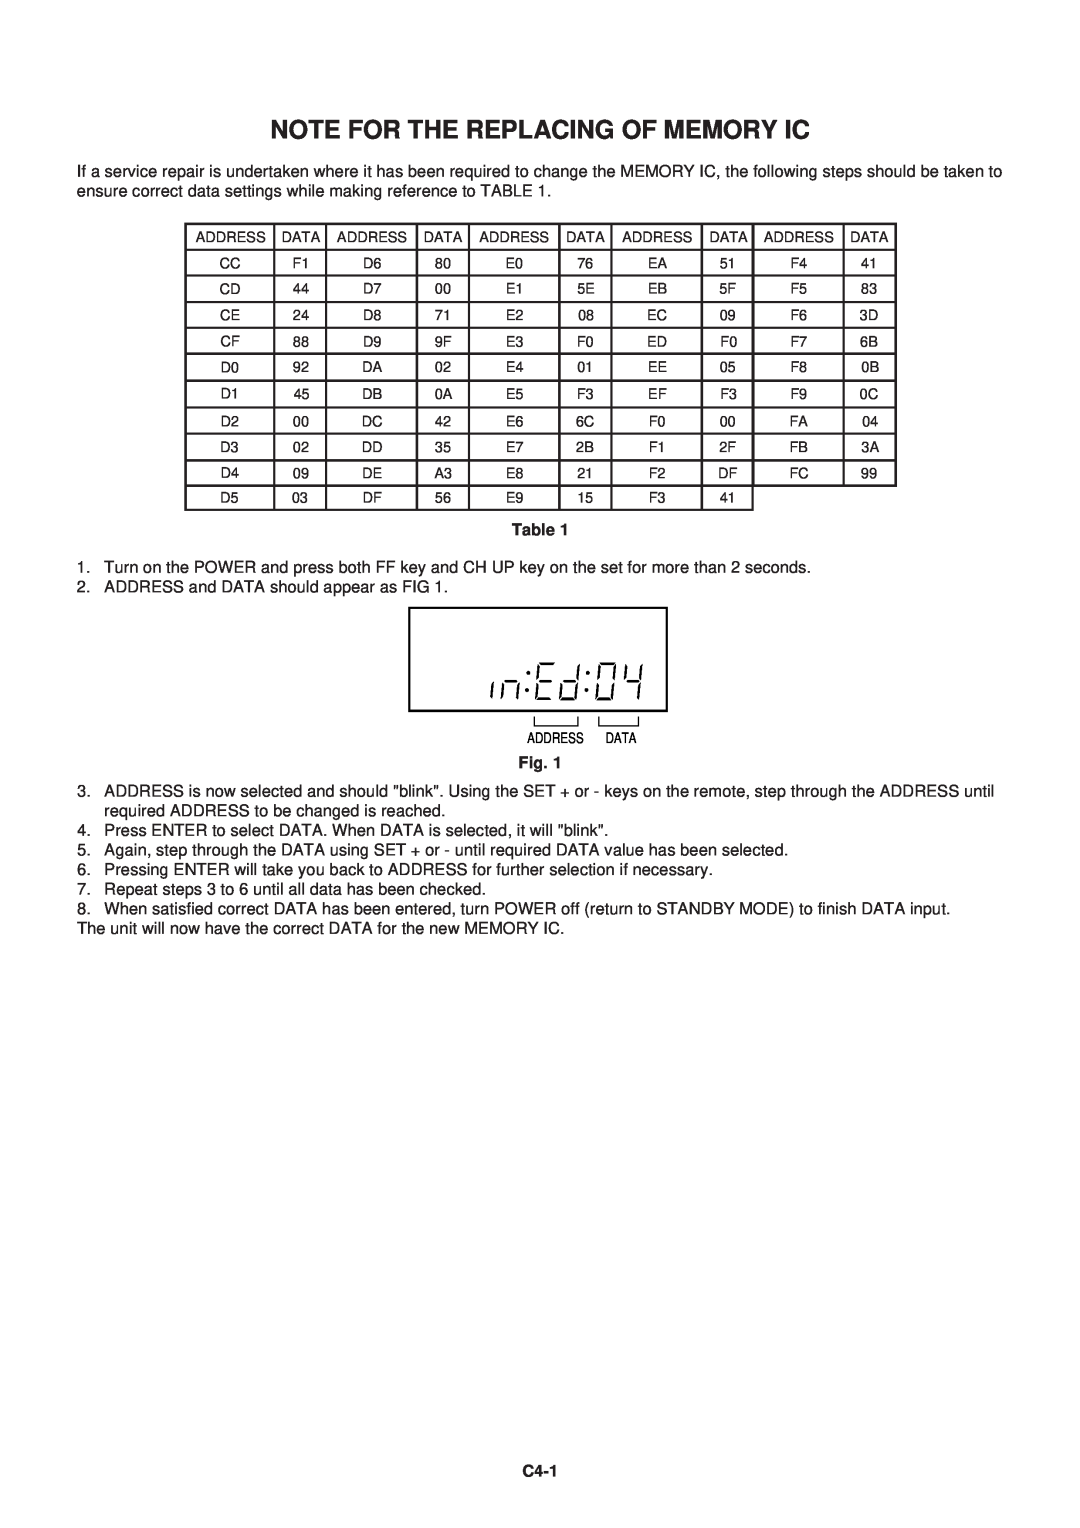 Aiwa HV-FX5100 service manual Note For The Replacing Of Memory Ic, C4-1 